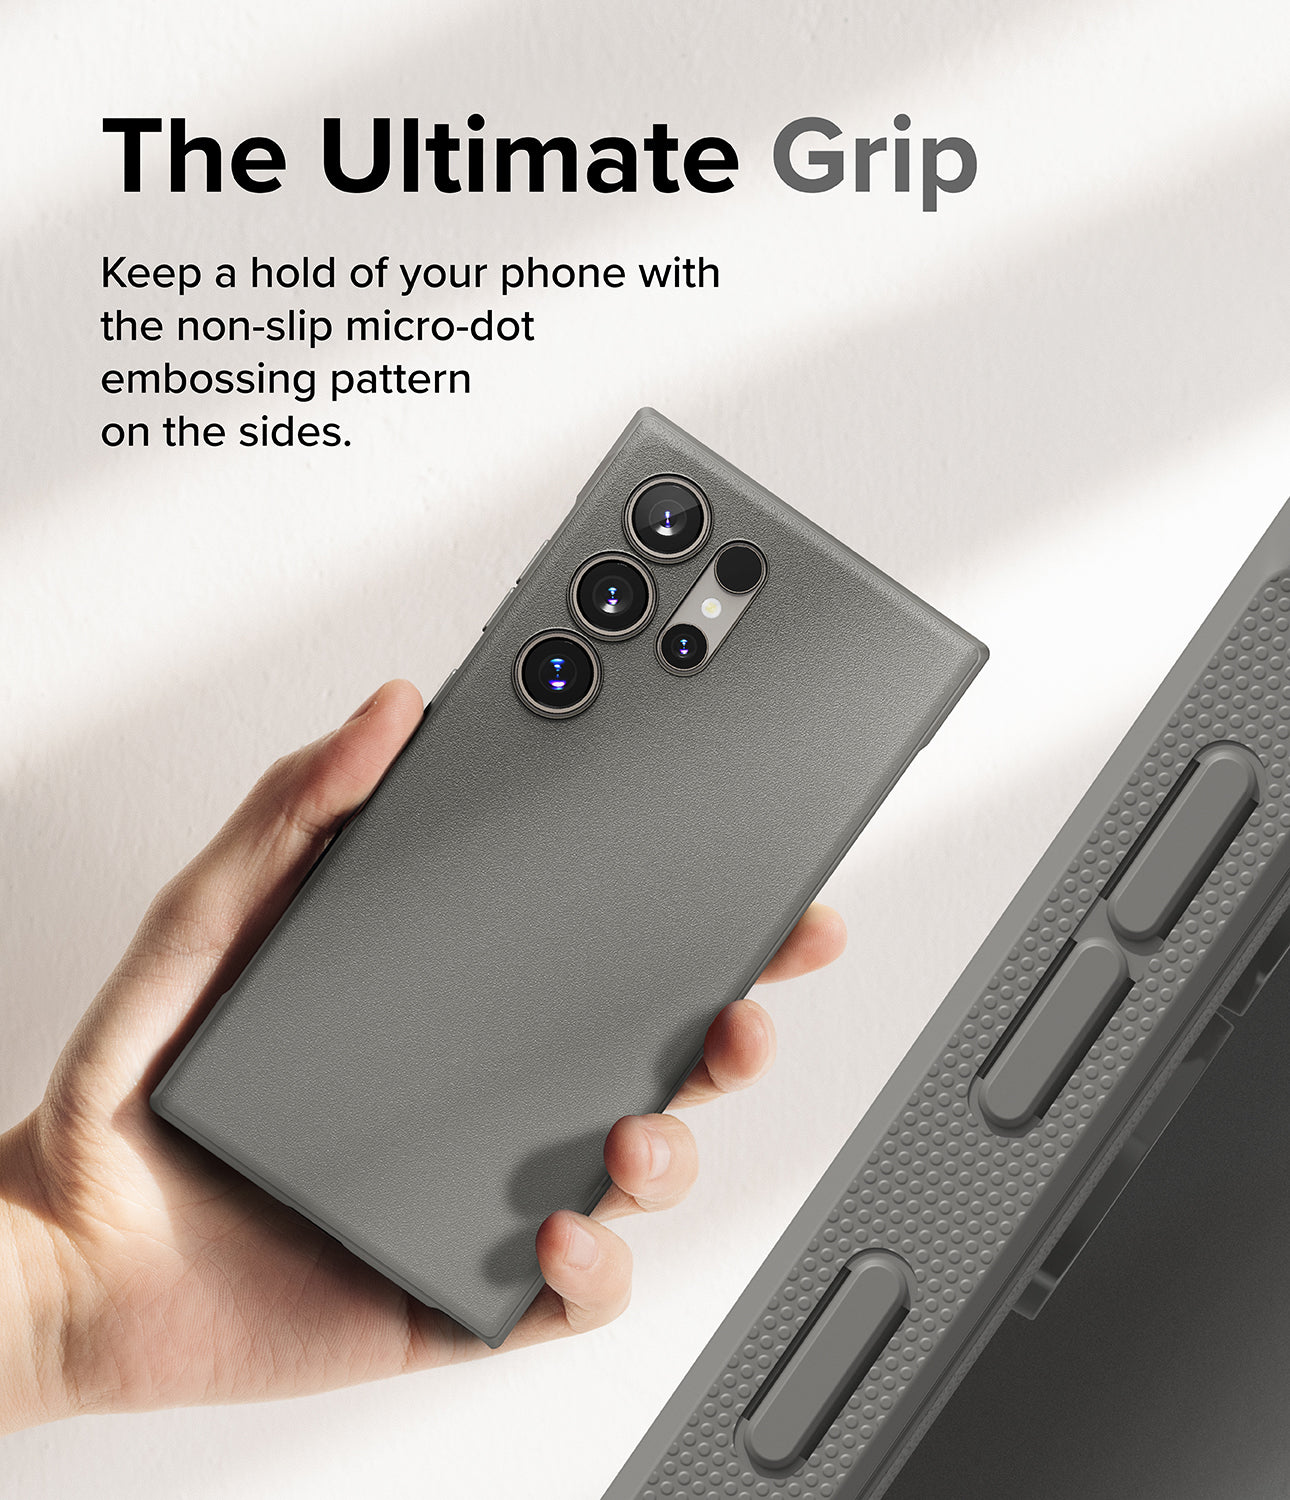 Galaxy S24 Ultra Case | Onyx - Gray - The Ultimate Grip. Keep a hold of your phone with the non-slip micro-dot embossing pattern on the sides.